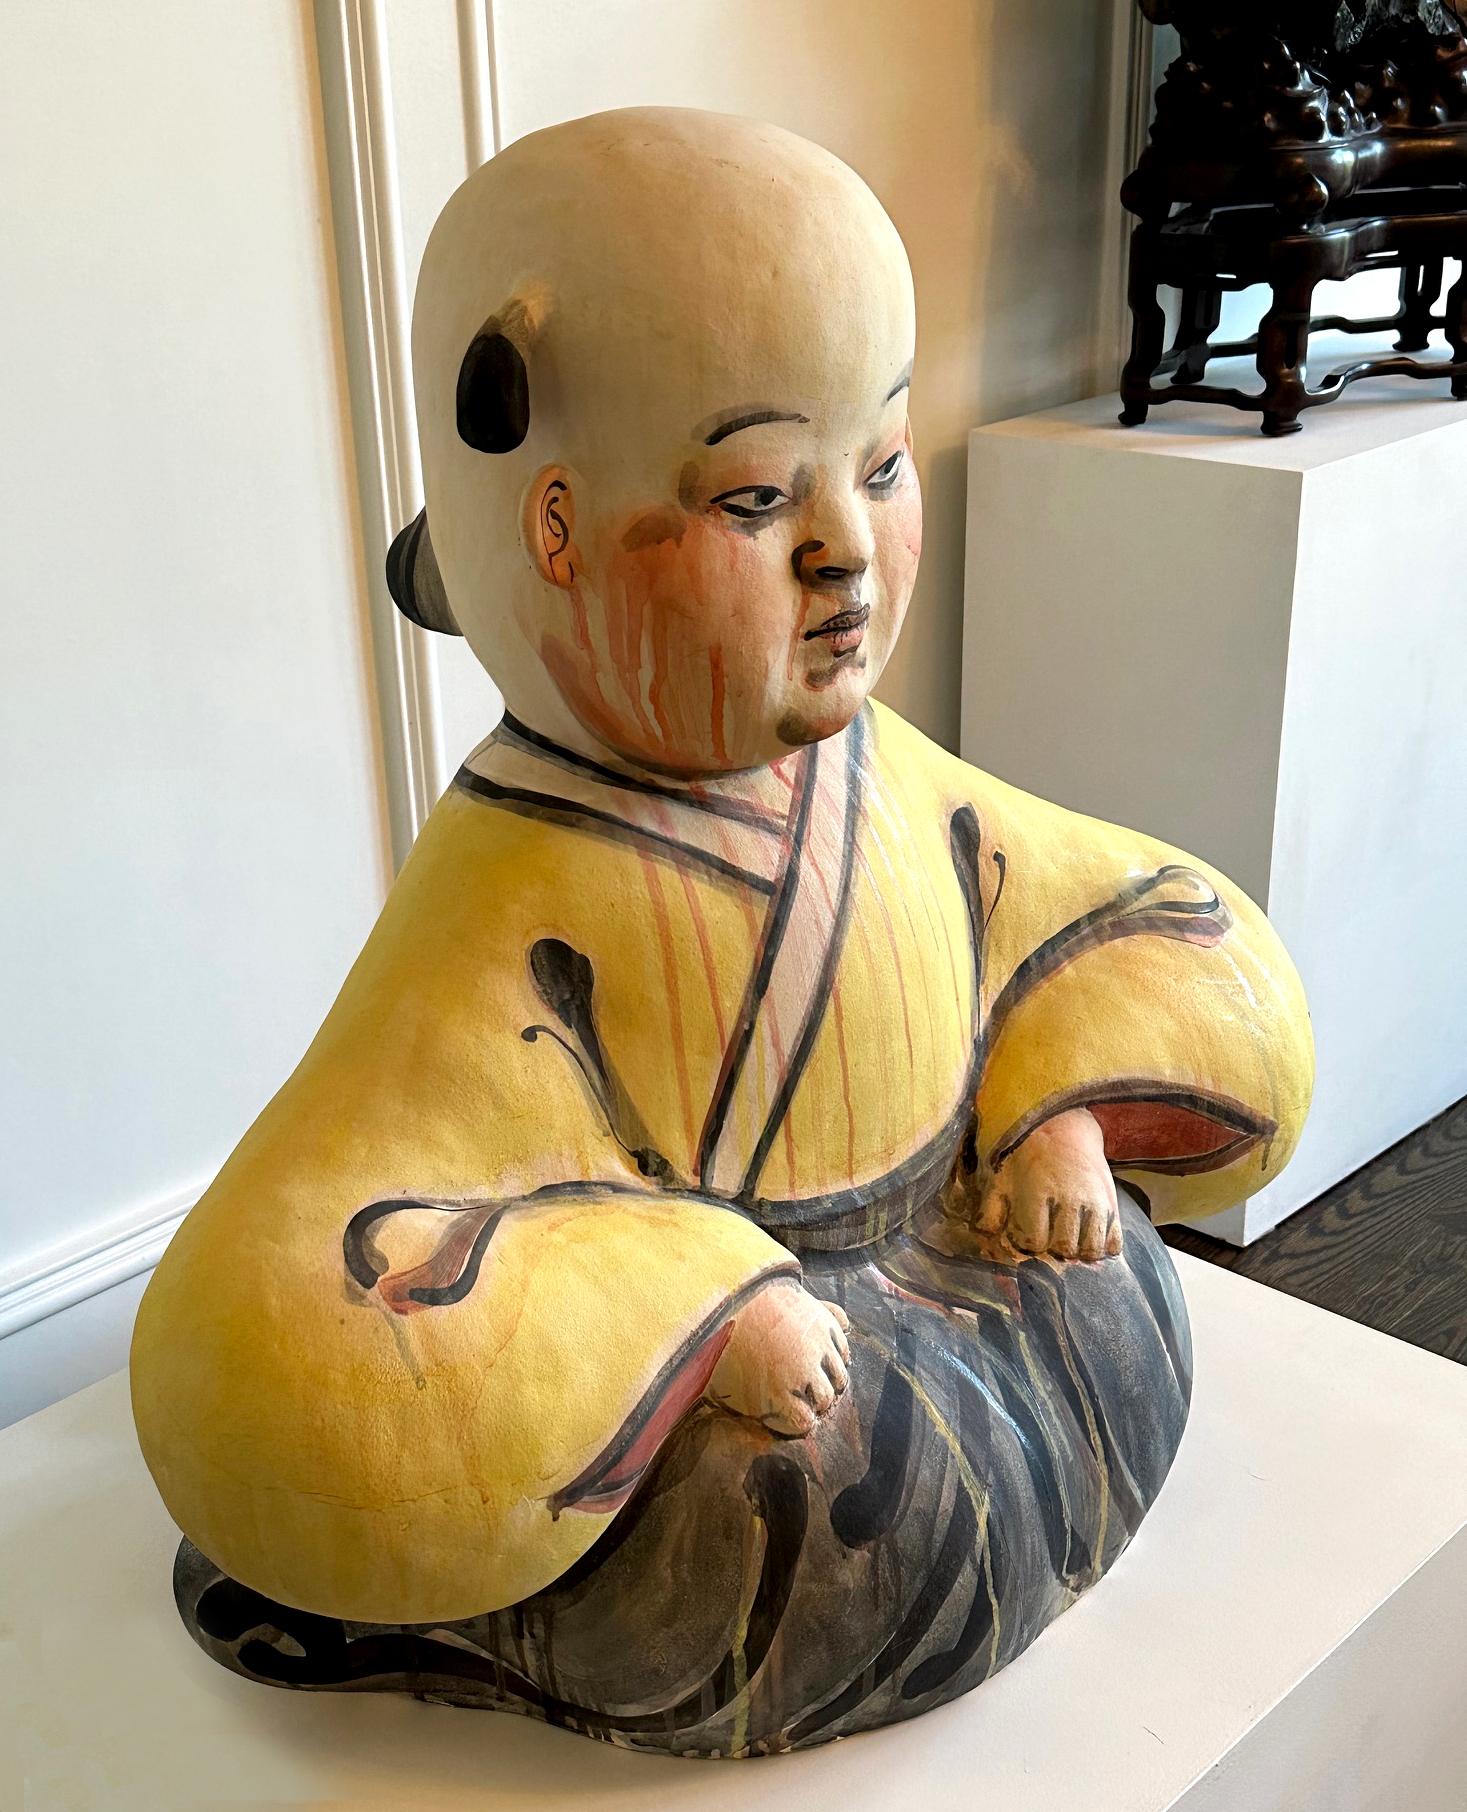 Modern Important Ceramic Sculpture Karako by Akio Takamori Exhibited and Published For Sale